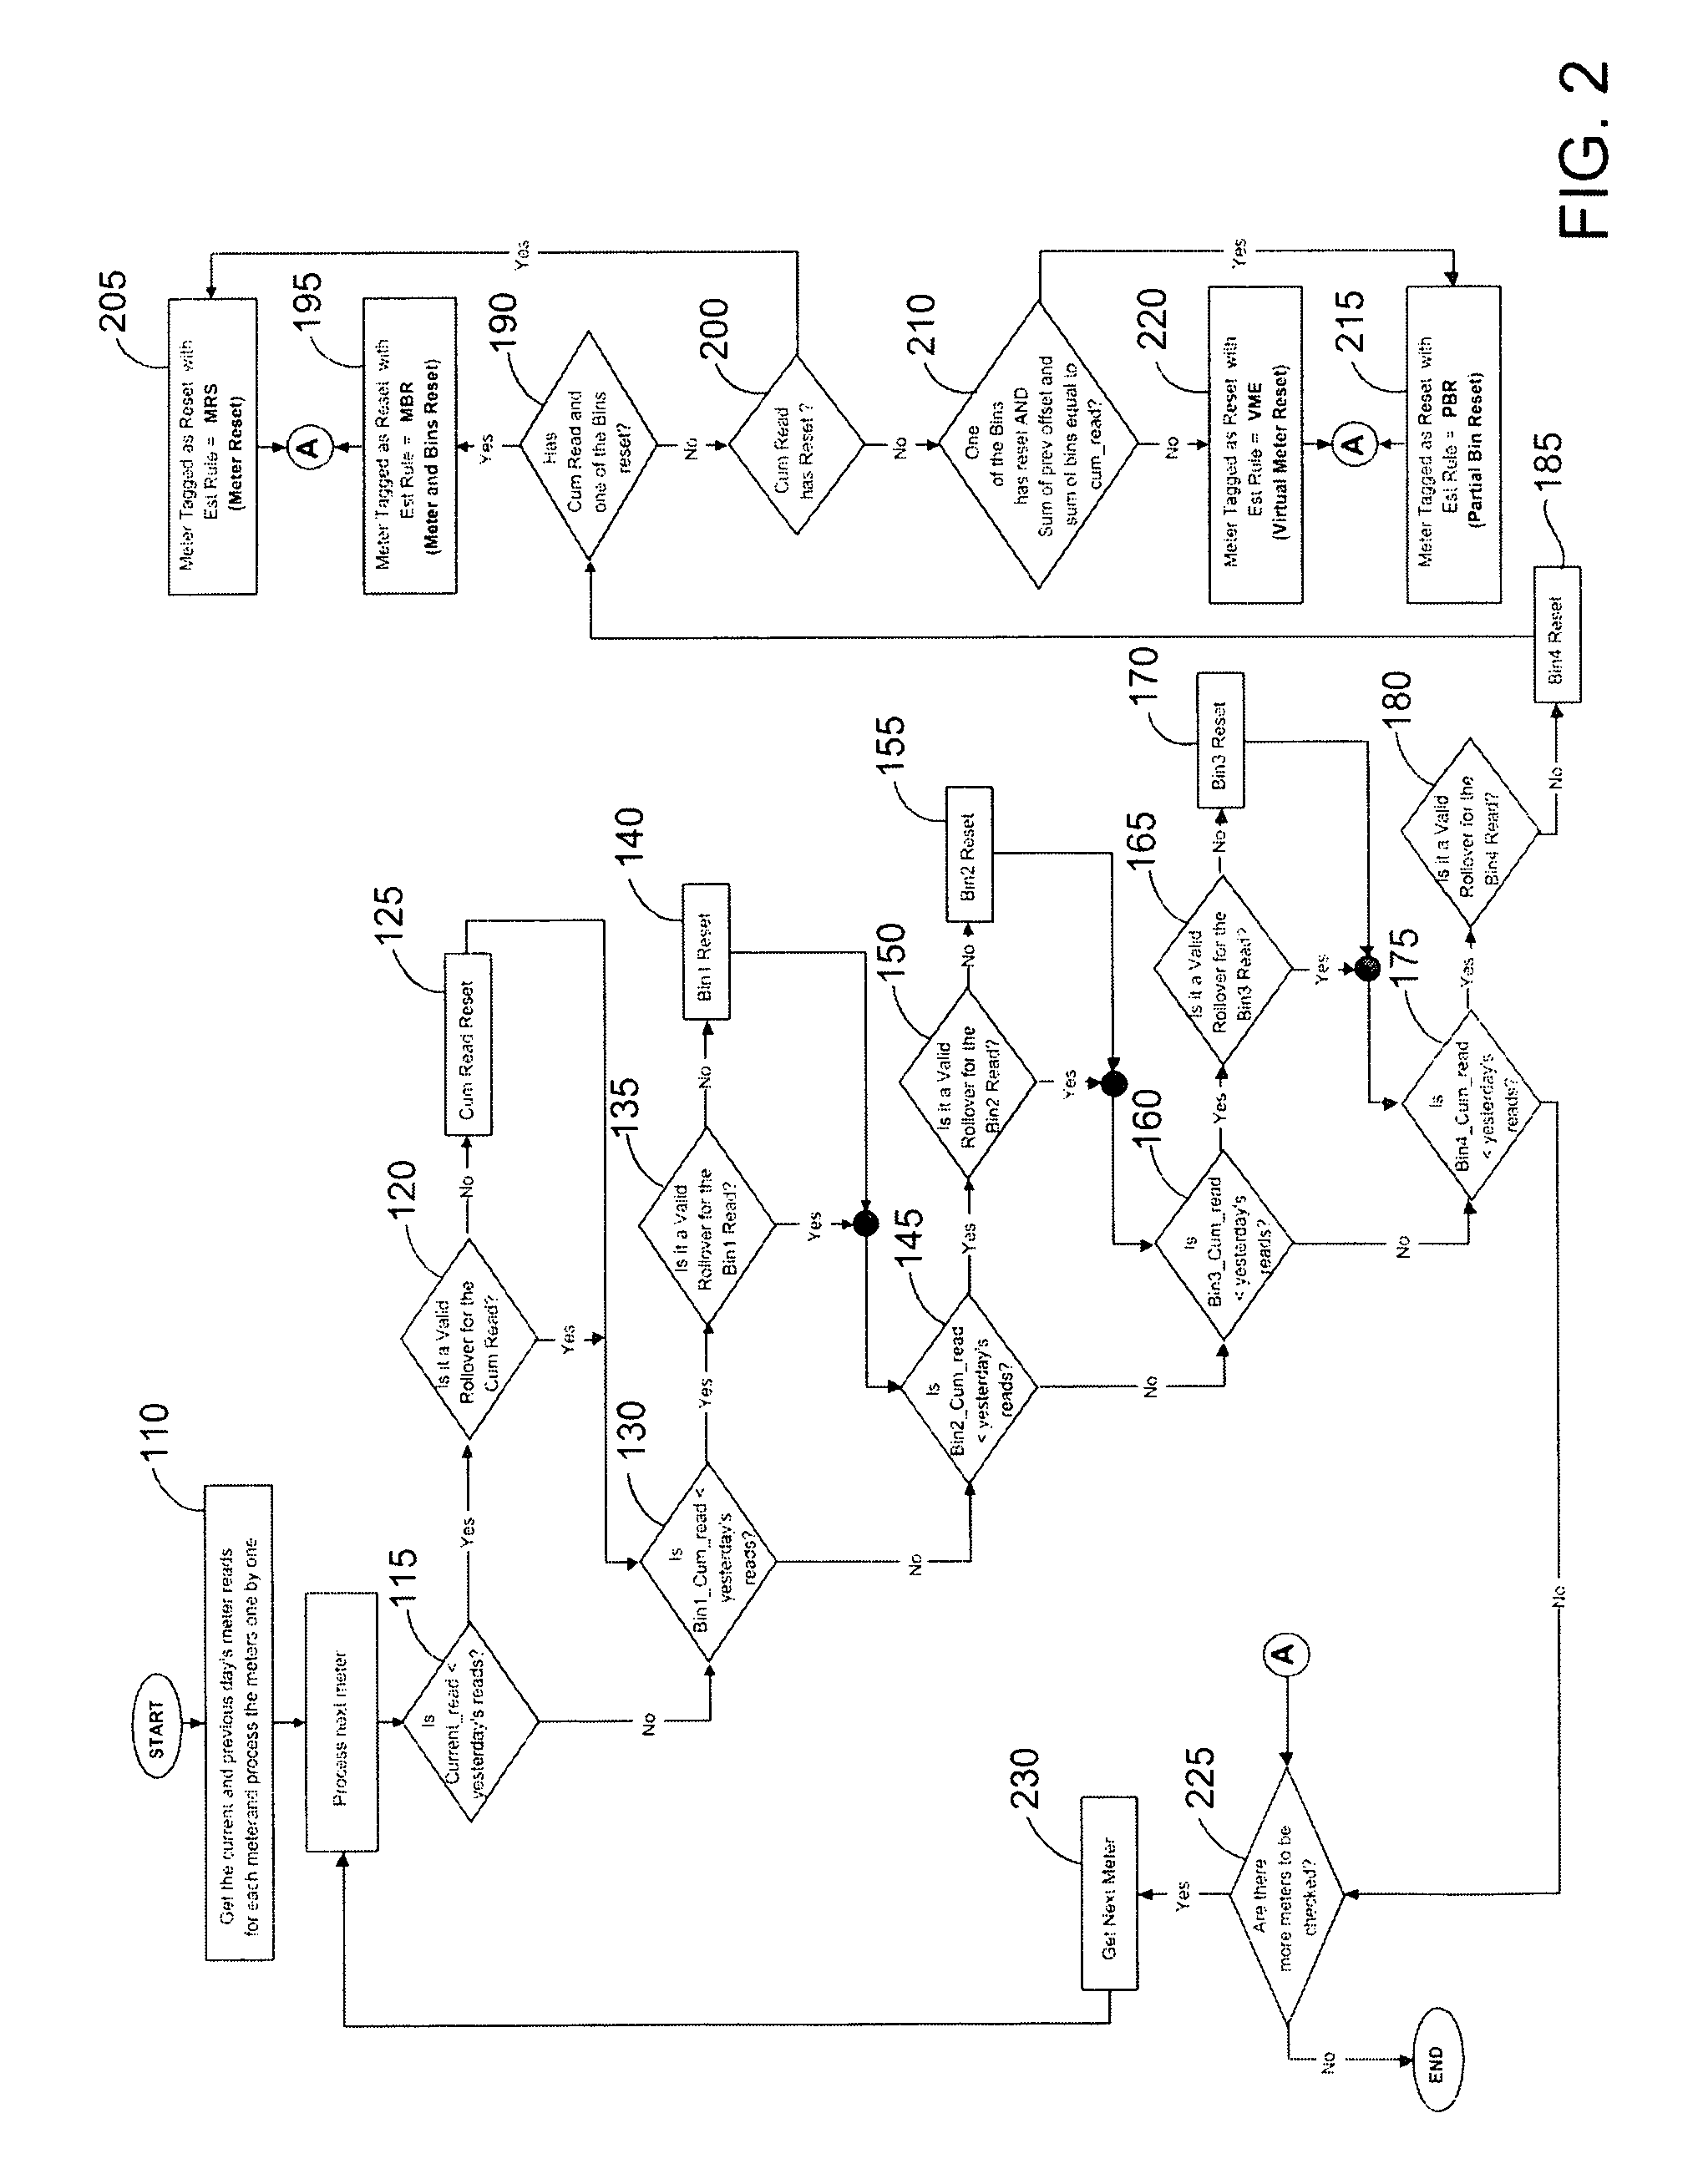 Method and system for validation, estimation and editing of daily meter read data